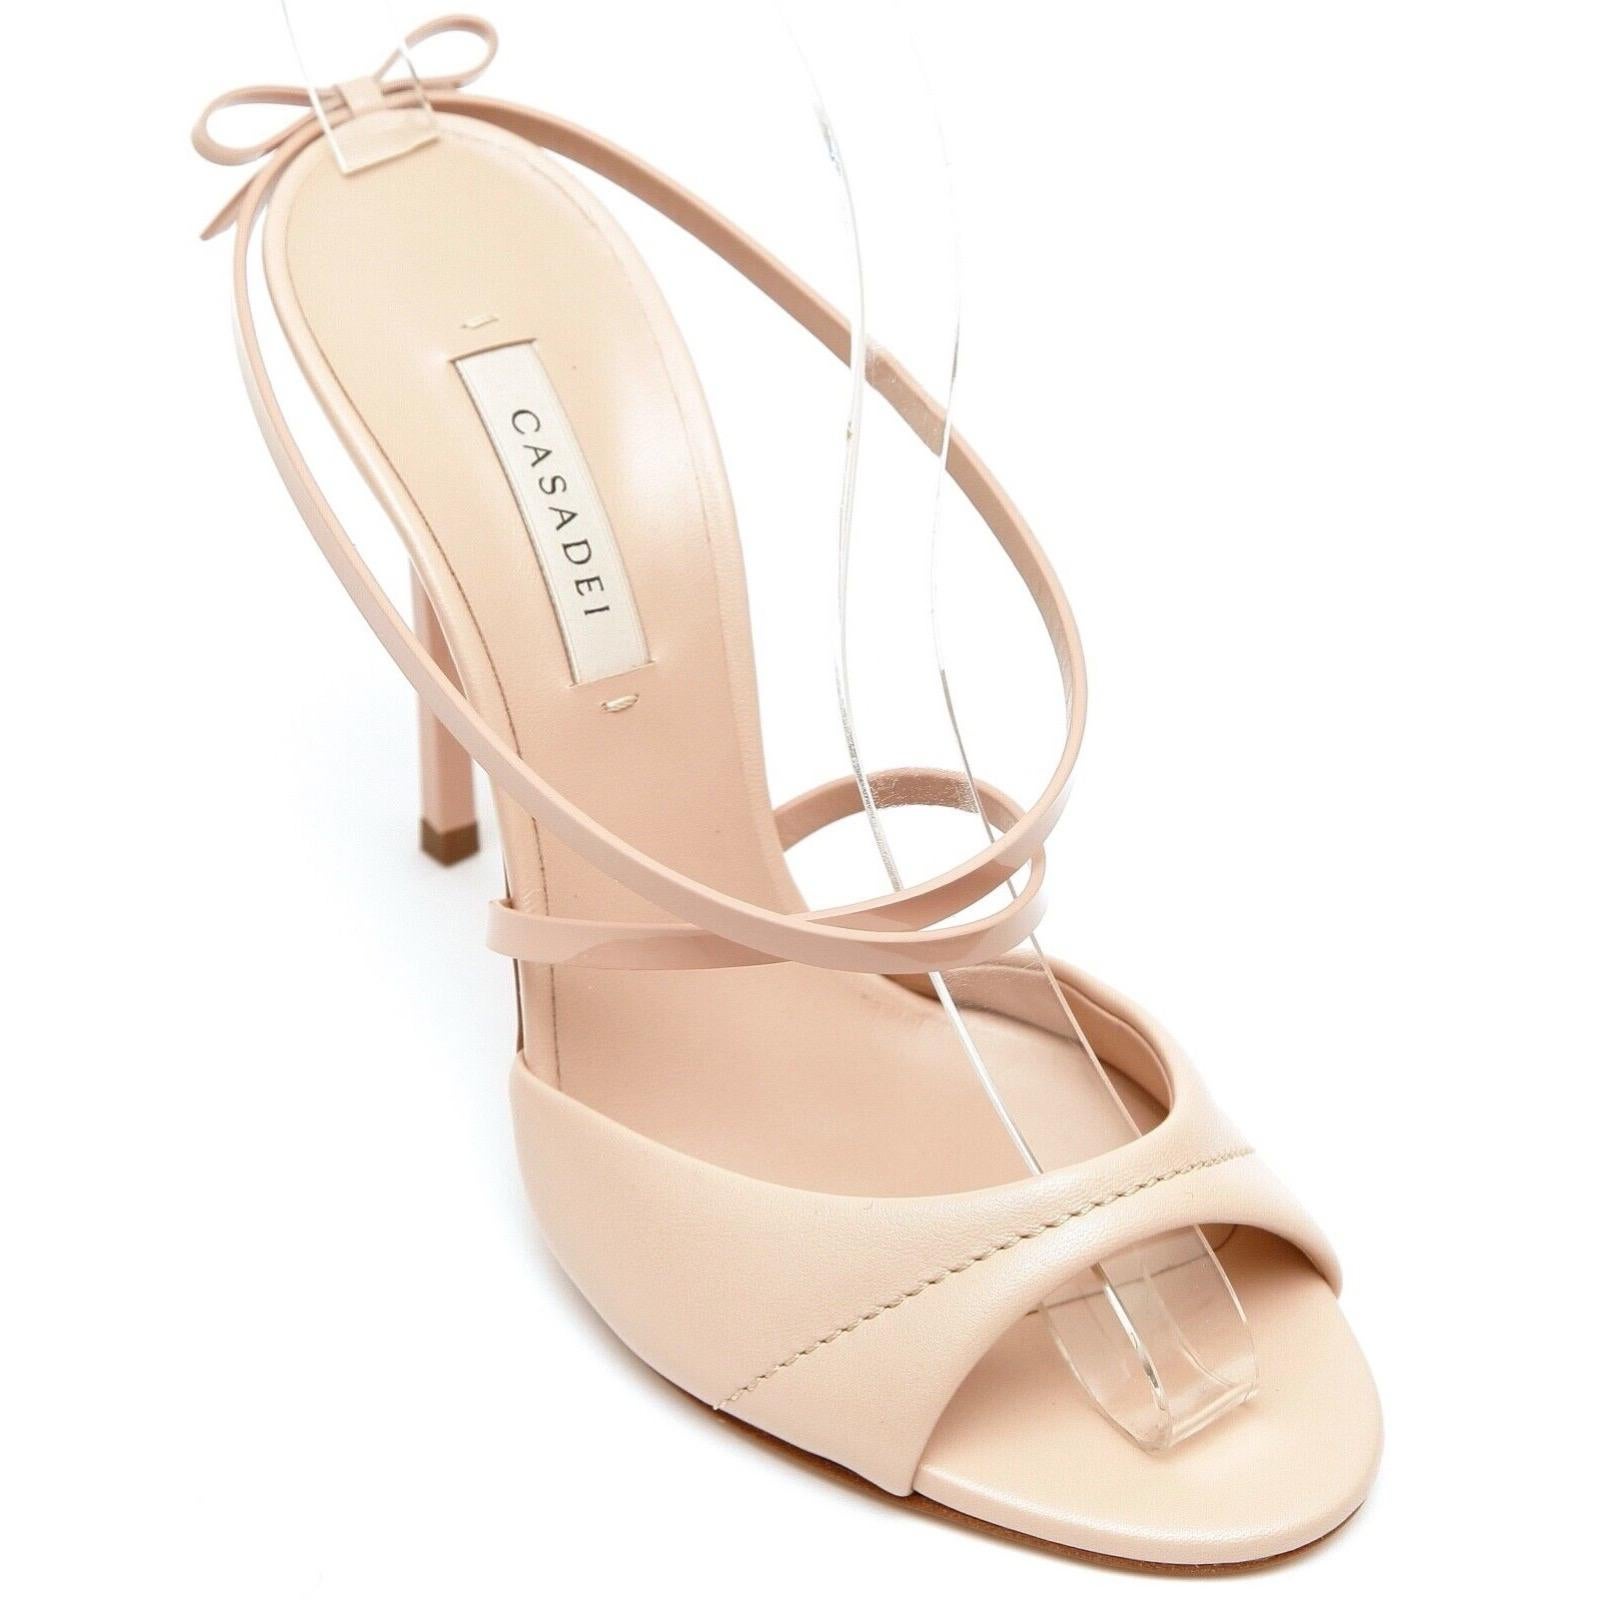 GUARANTEED AUTHENTIC CASADEI PENNY BLADE LEATHER MULE SANDALS

Retail excluding sales taxes, $895

Design:
- Blush pink leather PENNY blade sandals.
- Thin strap over top of foot.
- Wider strap over vamp.
- Bow at back of foot.
- Blade style